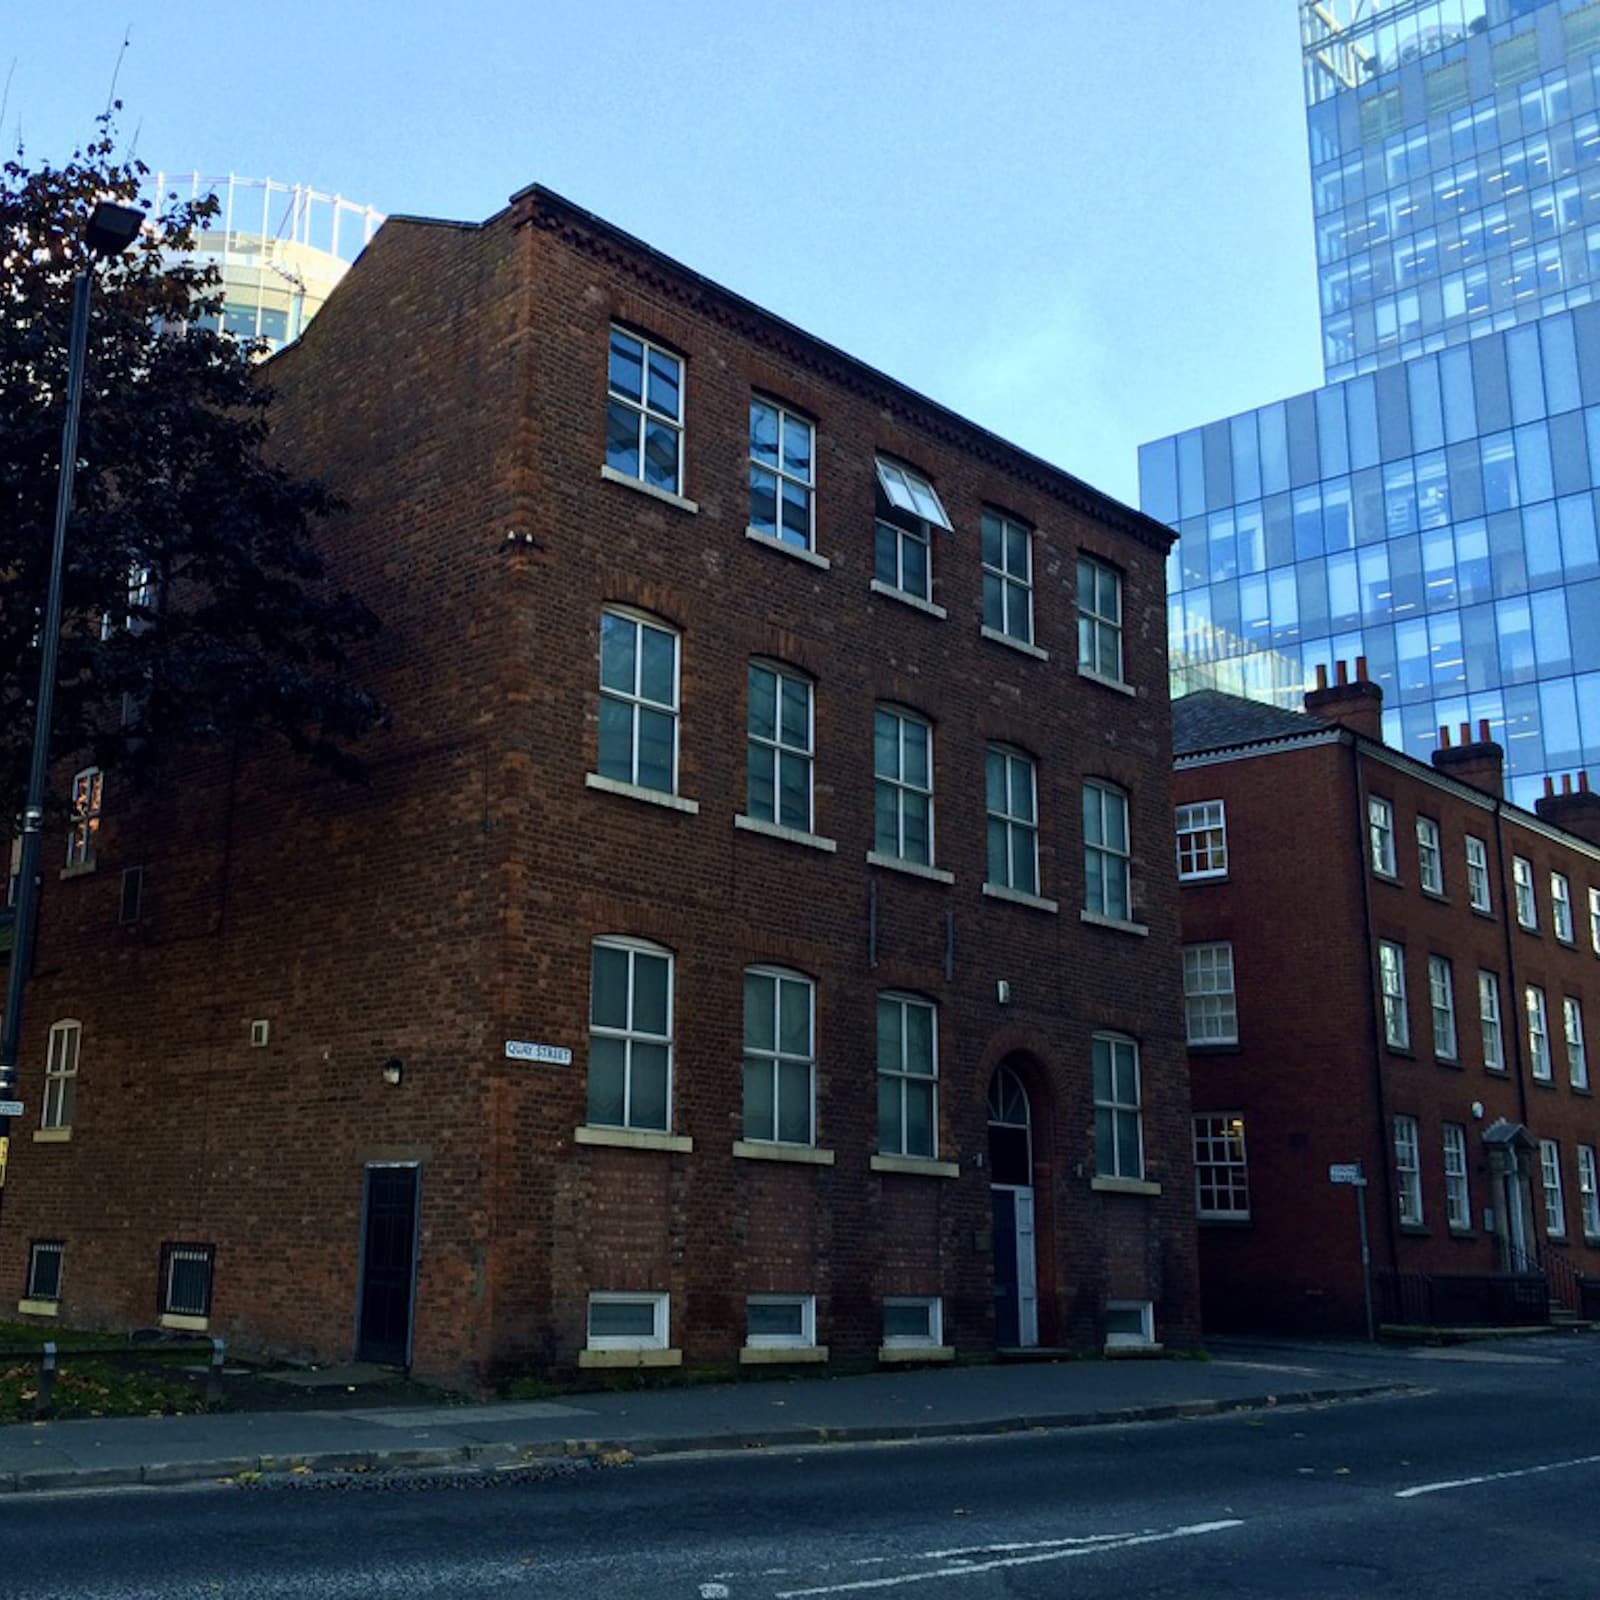 76 Quay St Manchester industrial building